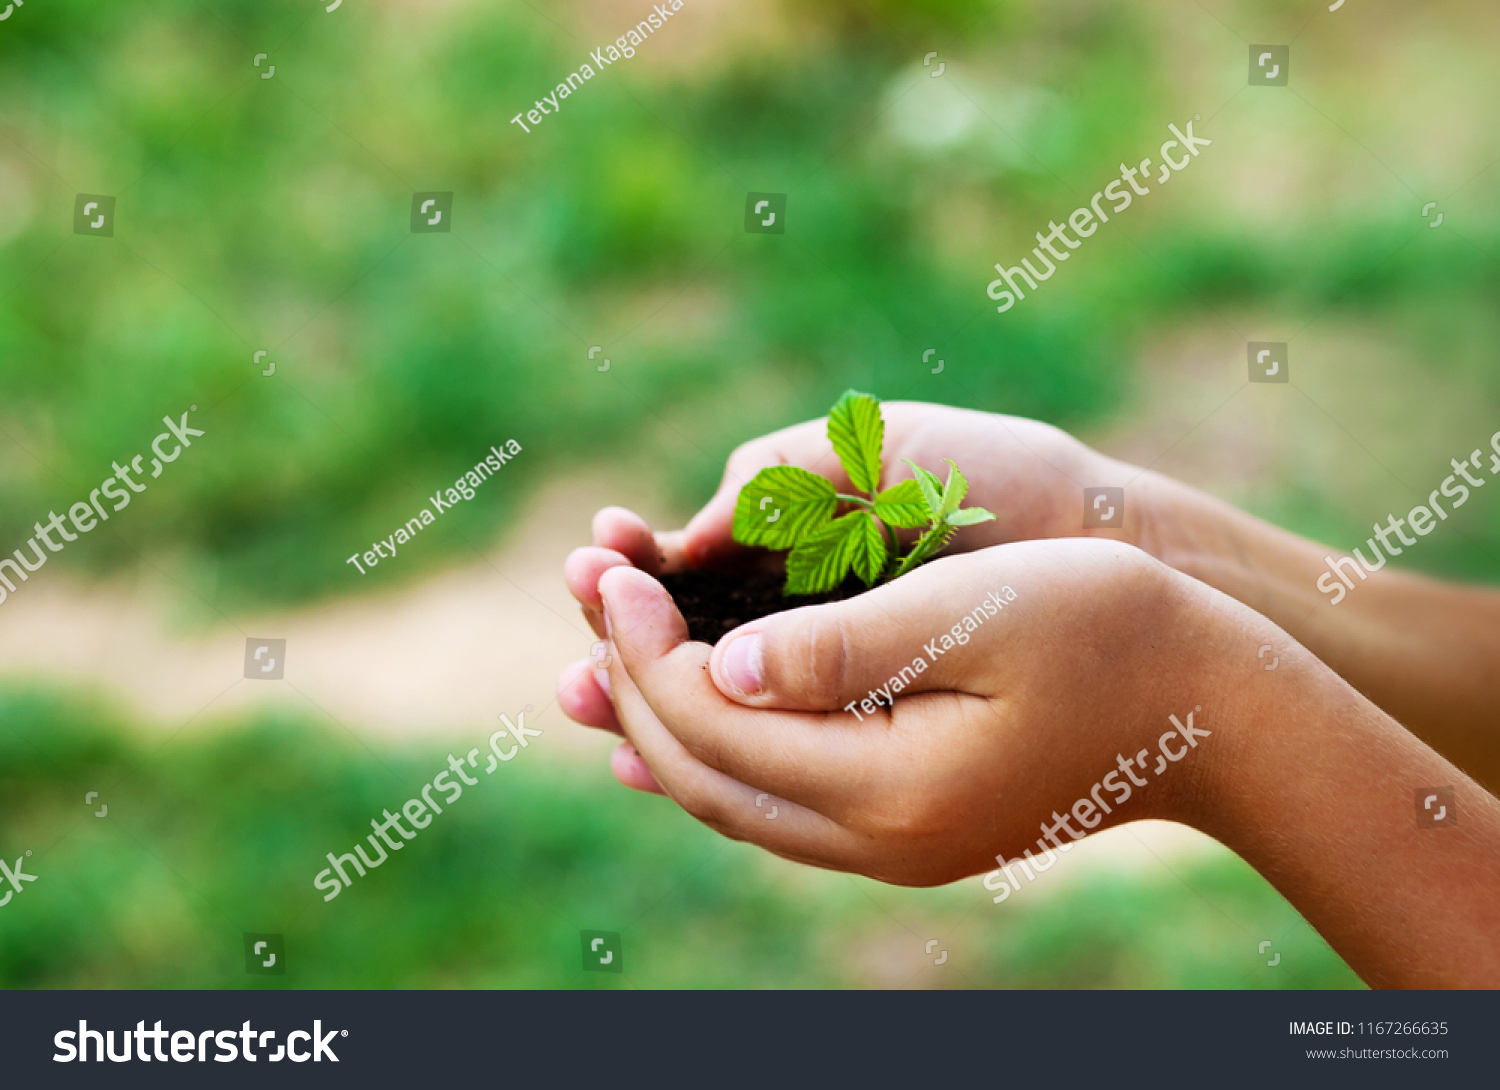 plant in hands - grass background #1167266635